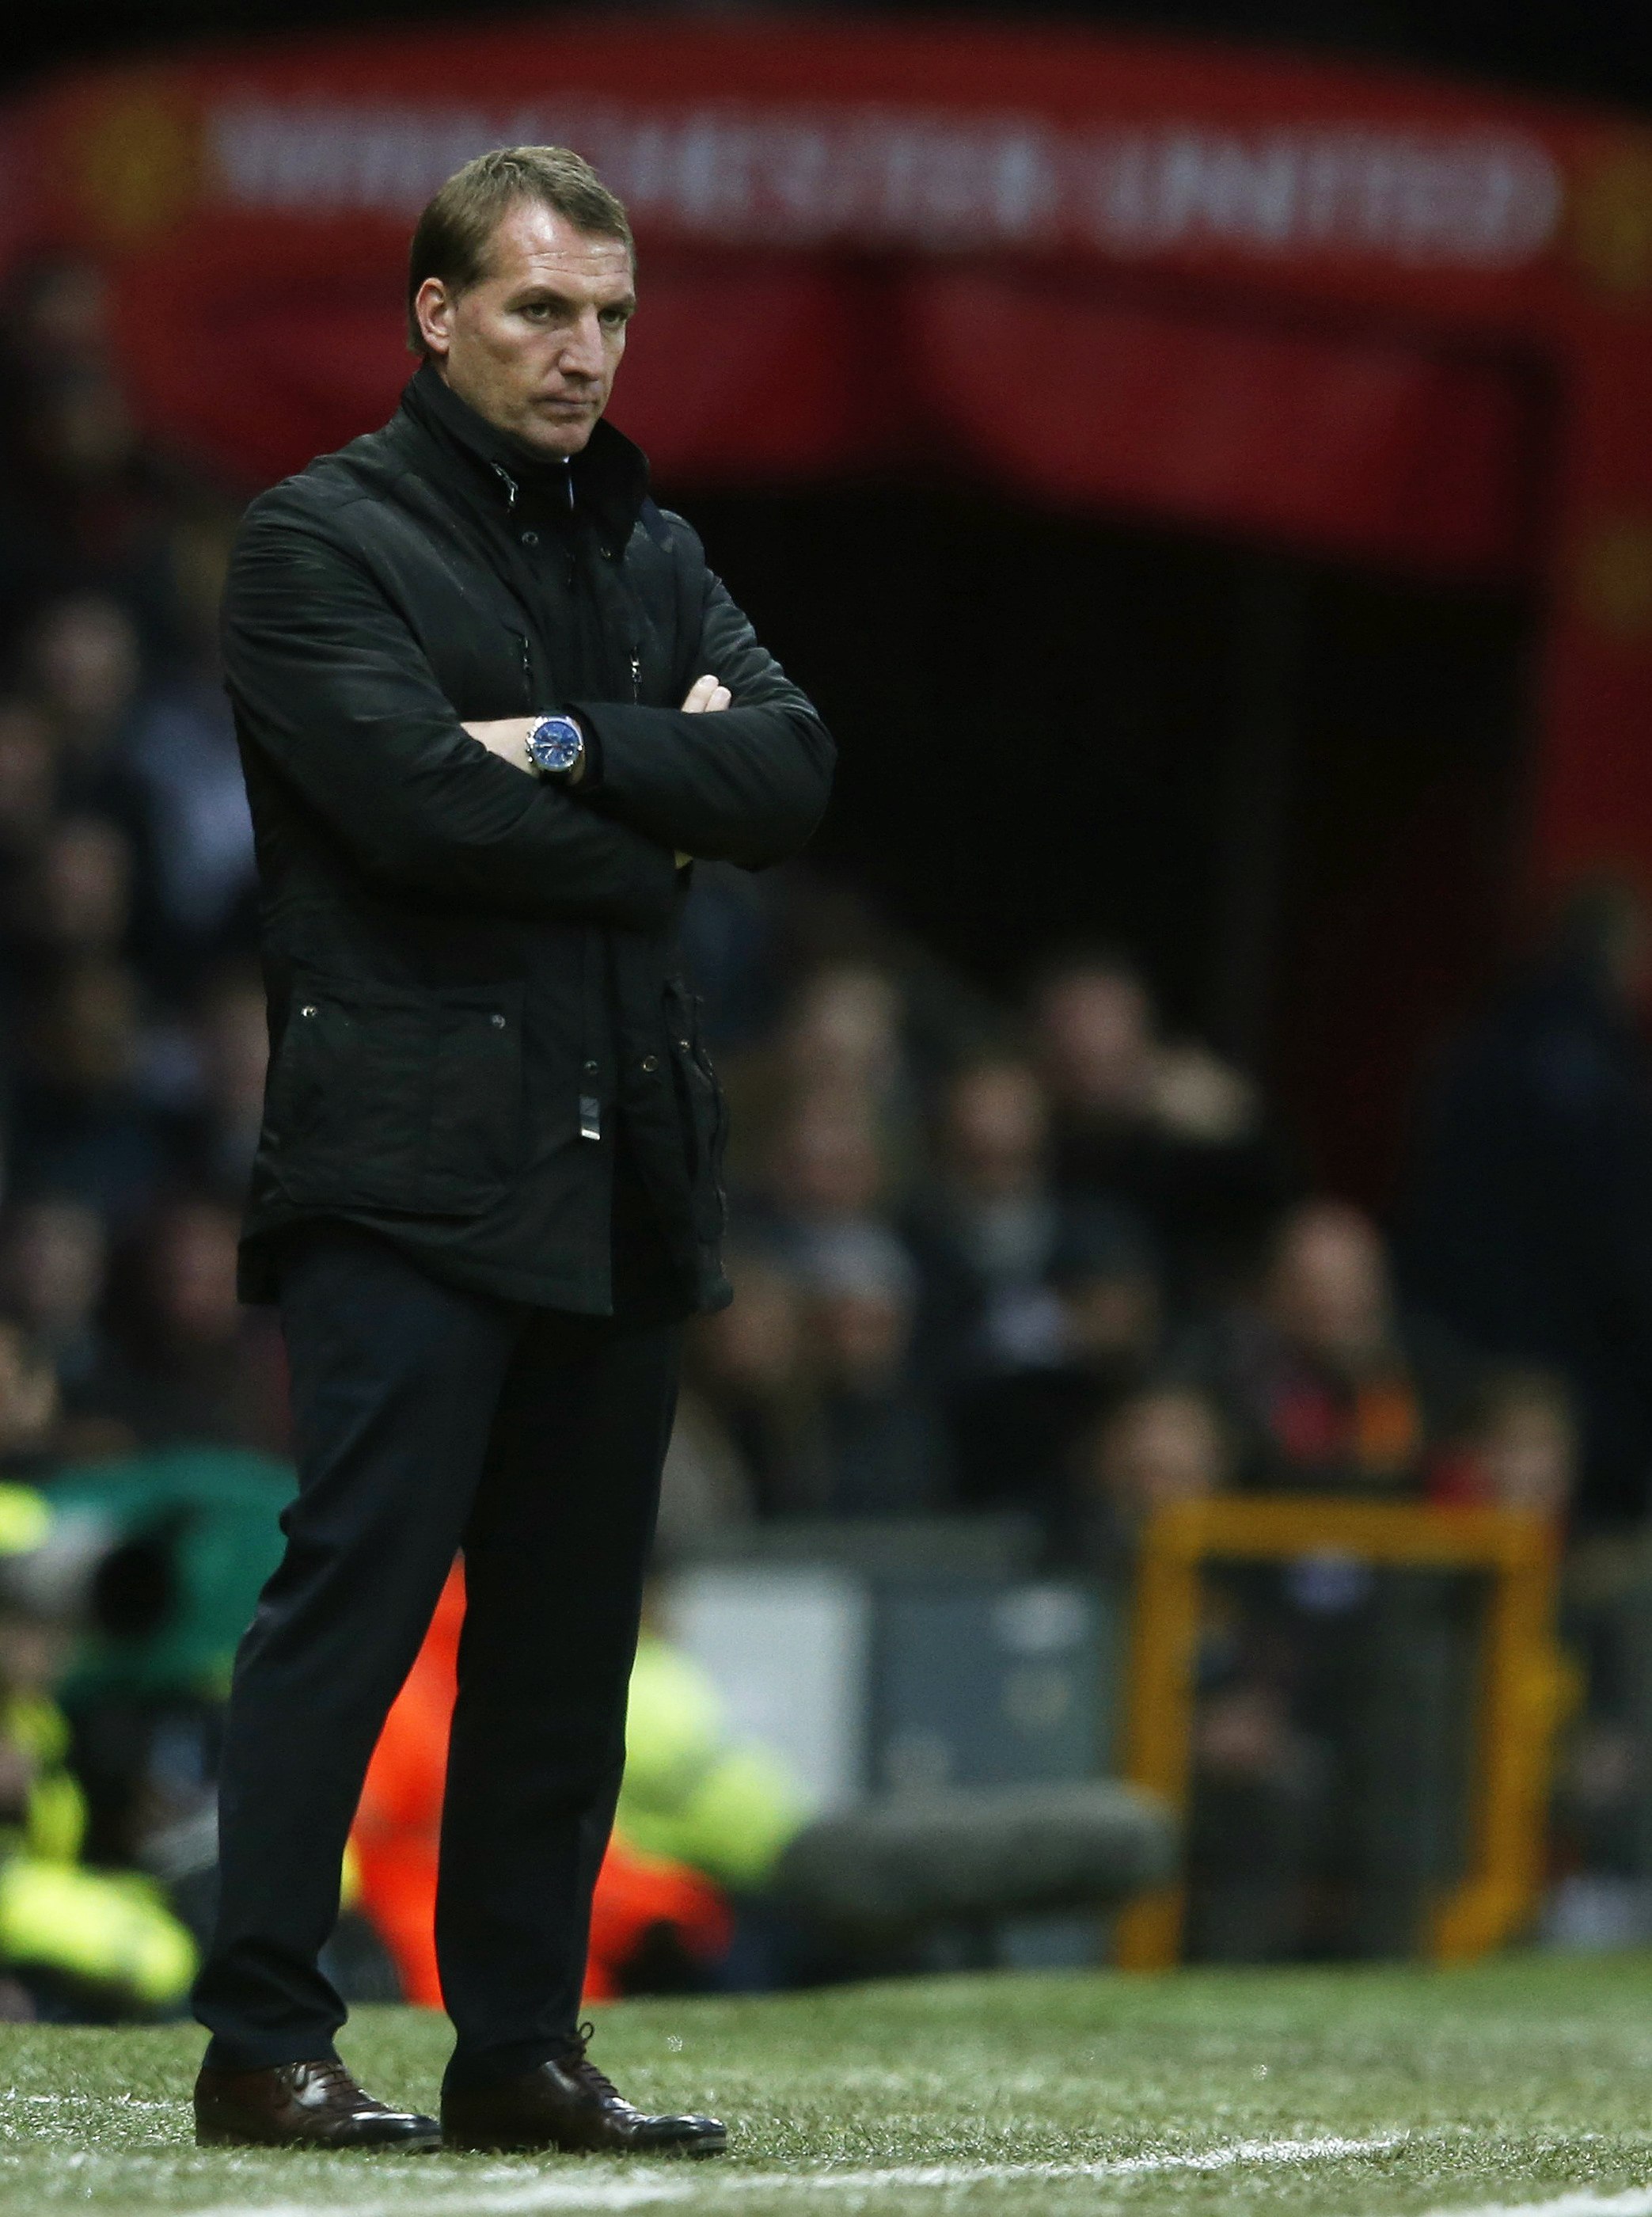 Liverpool manager Brendan Rodgers watches play during their English Premier League soccer match against Manchester United at Old Trafford in Manchester